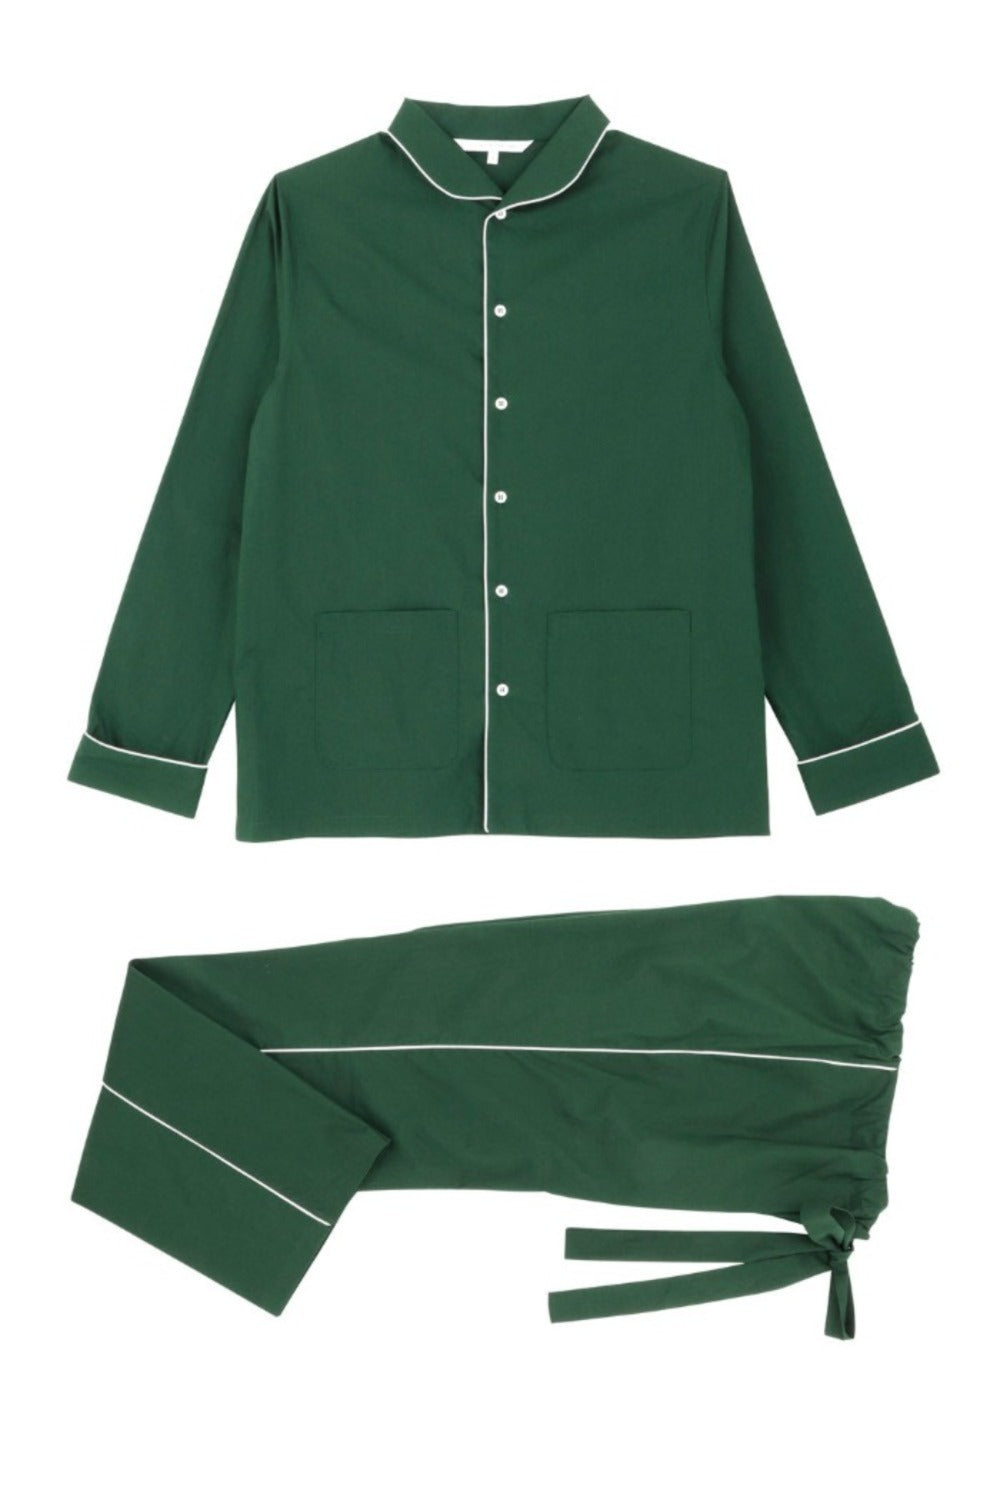 The Waldorf in green cotton broadcloth